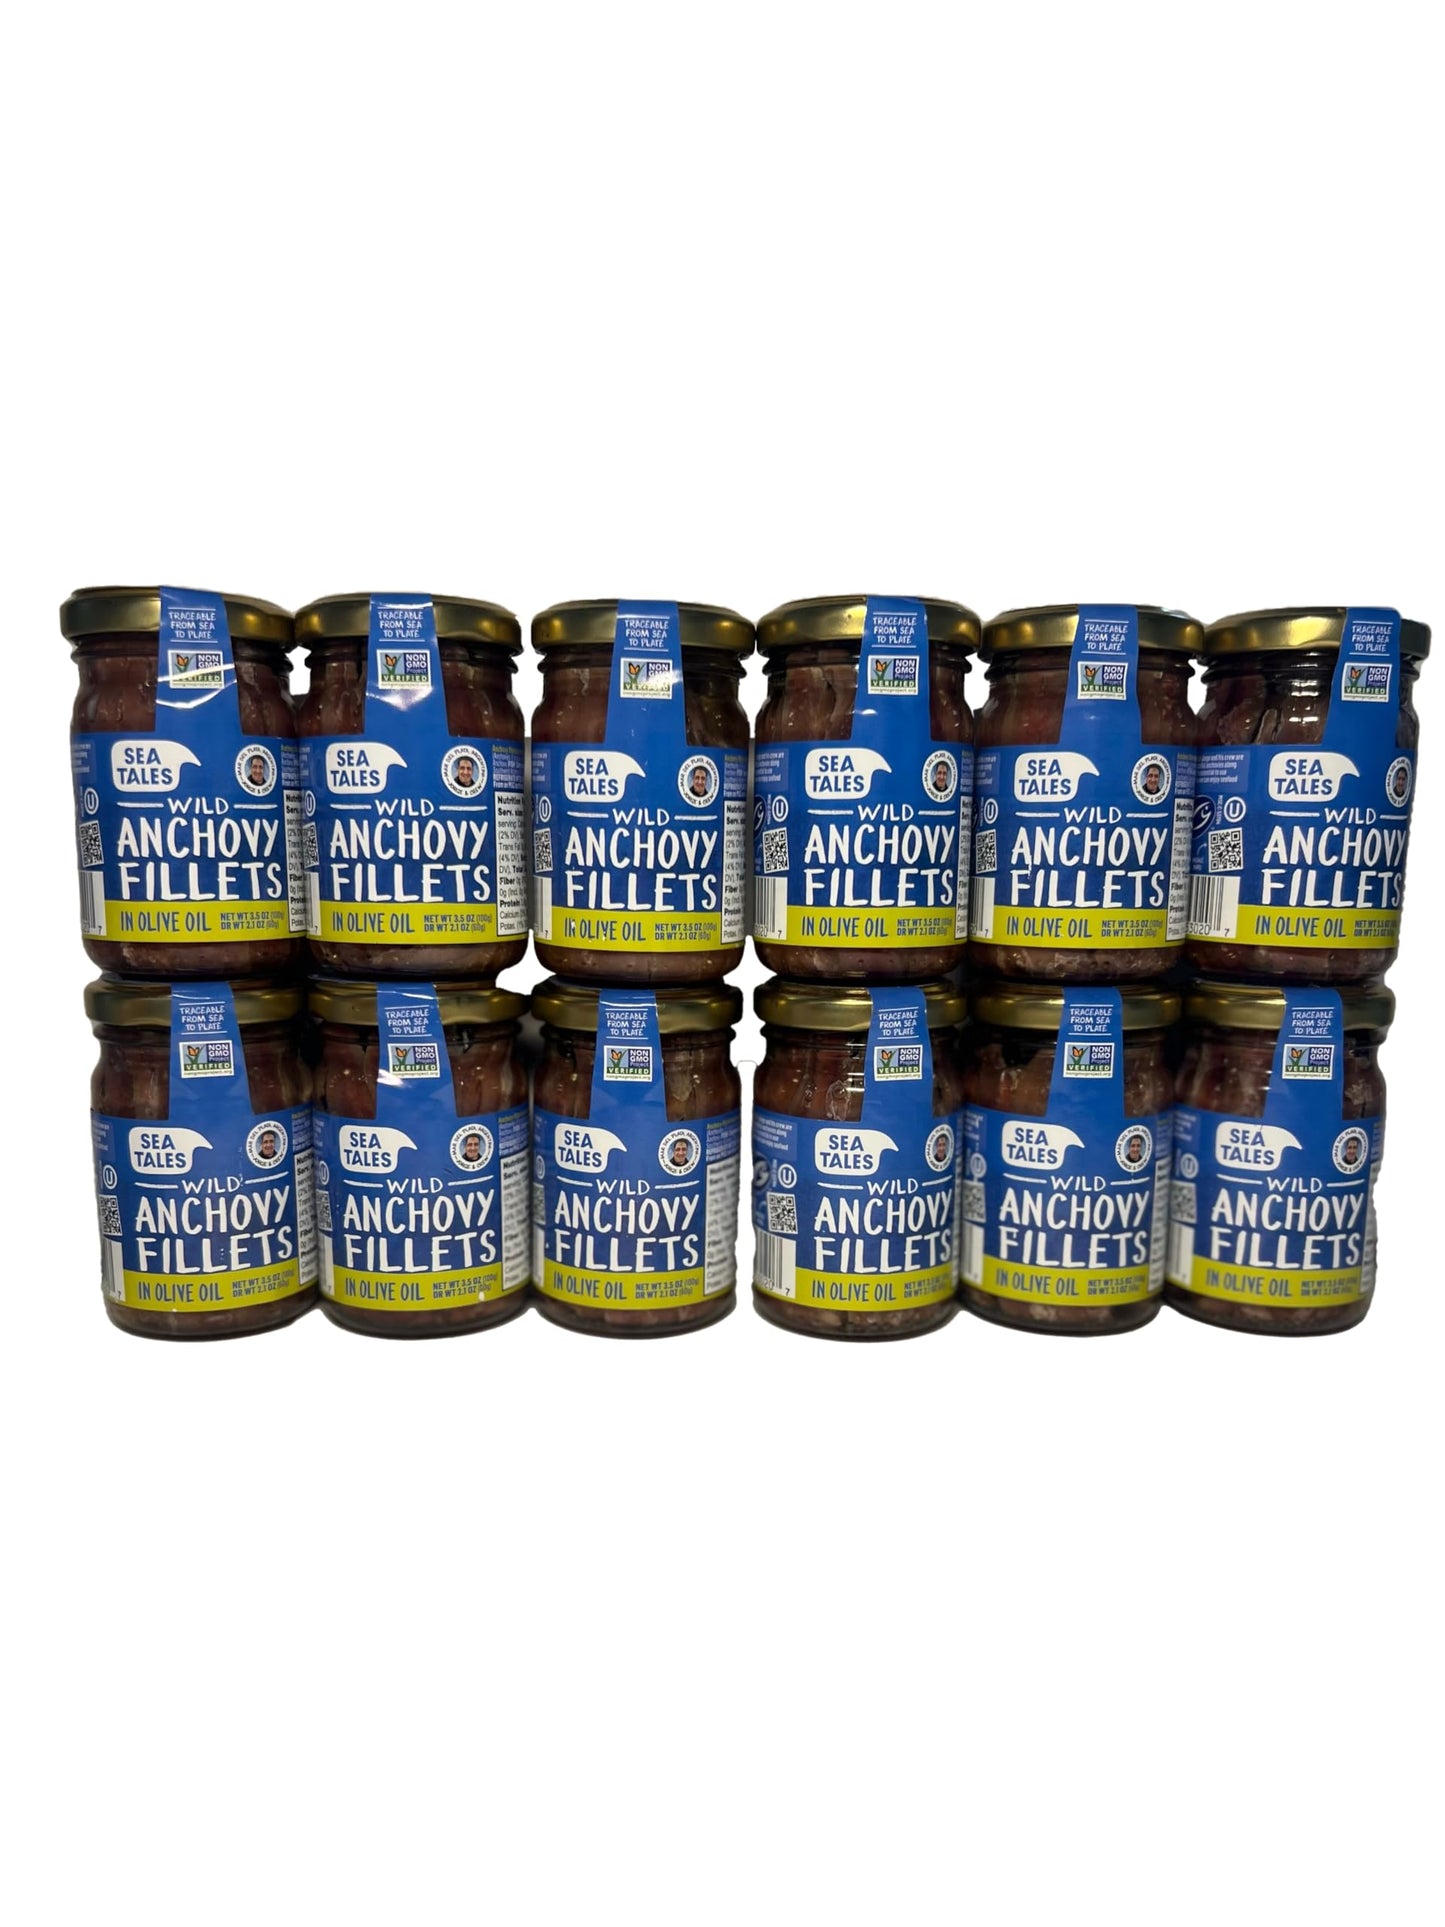 Sea Tales Anchovy Fillets in Olive Oil - Jar - Wild Caught Fish - High in Omega 3 Fatty Acids - Gluten Free - High Protein Food - Sustainably Caught - Keto Diet Friendly - 3.5 oz - (12 Pack)